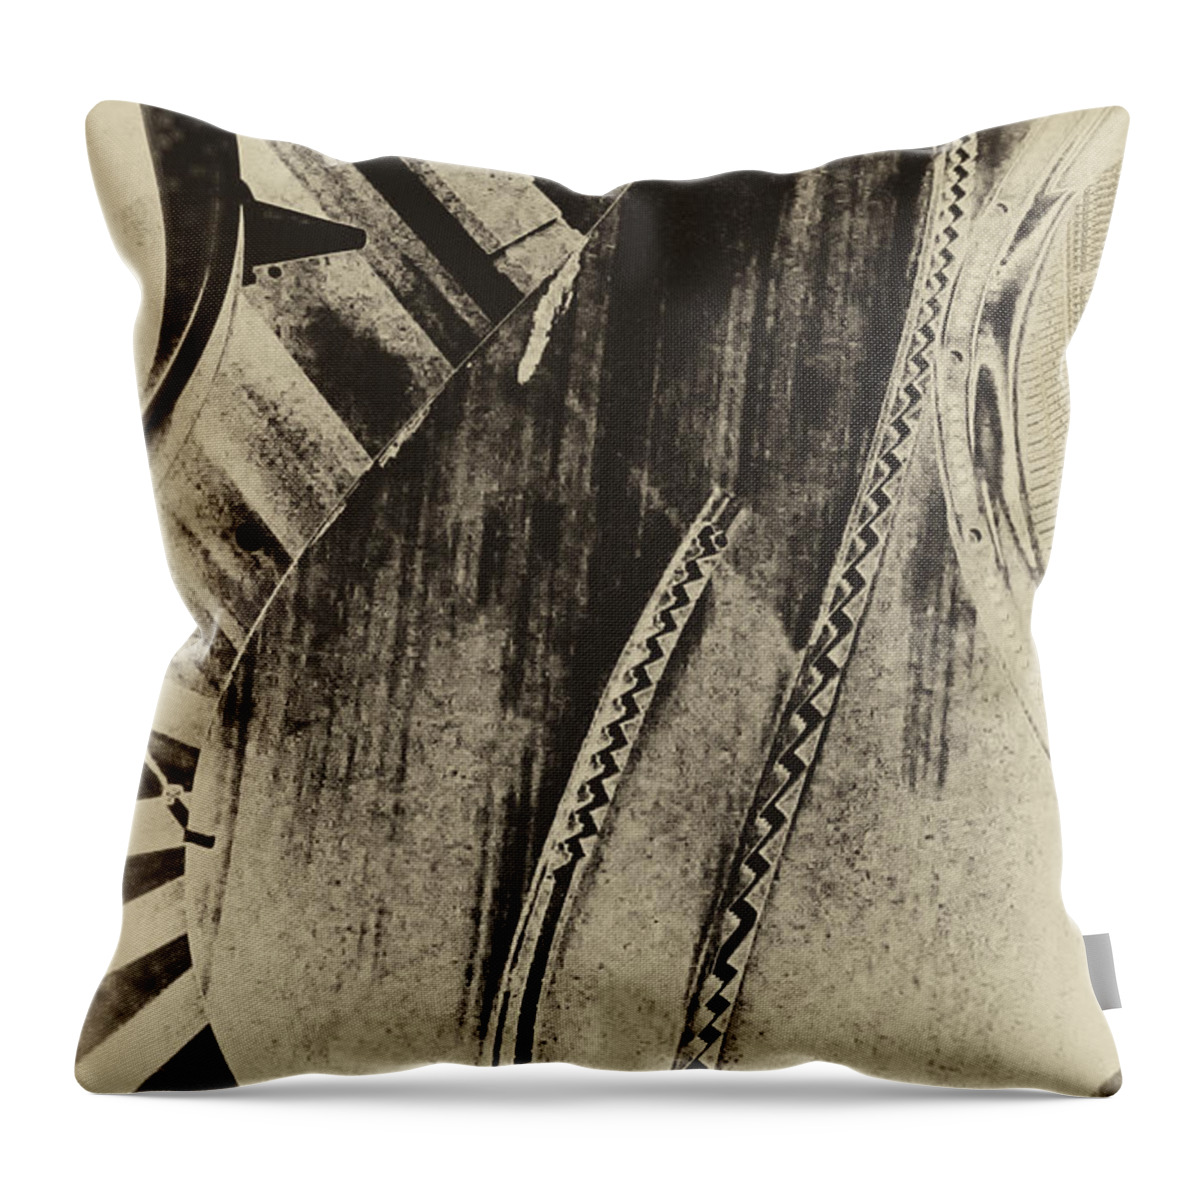 Steinway Piano Throw Pillow featuring the digital art Steinway Piano Inners by Georgianne Giese